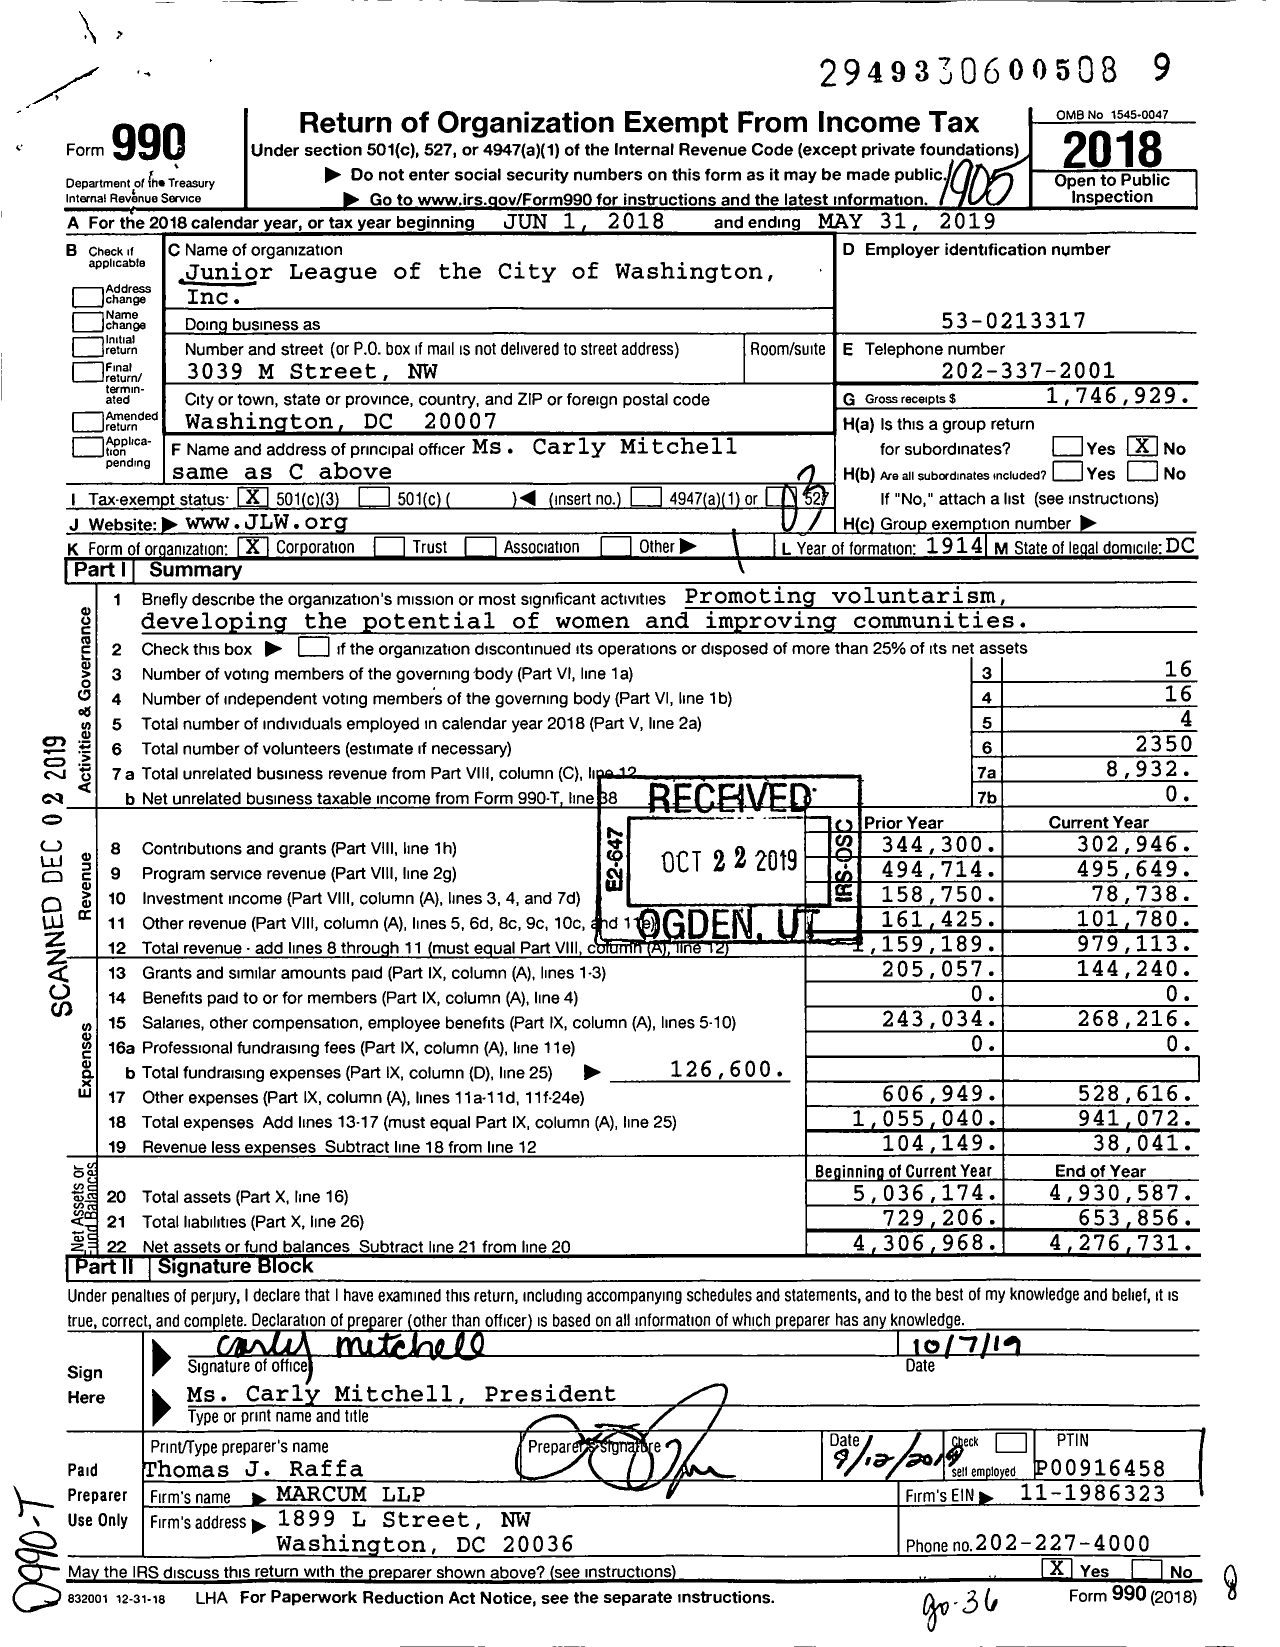 Image of first page of 2018 Form 990 for Junior League of the City of Washington (JLW)